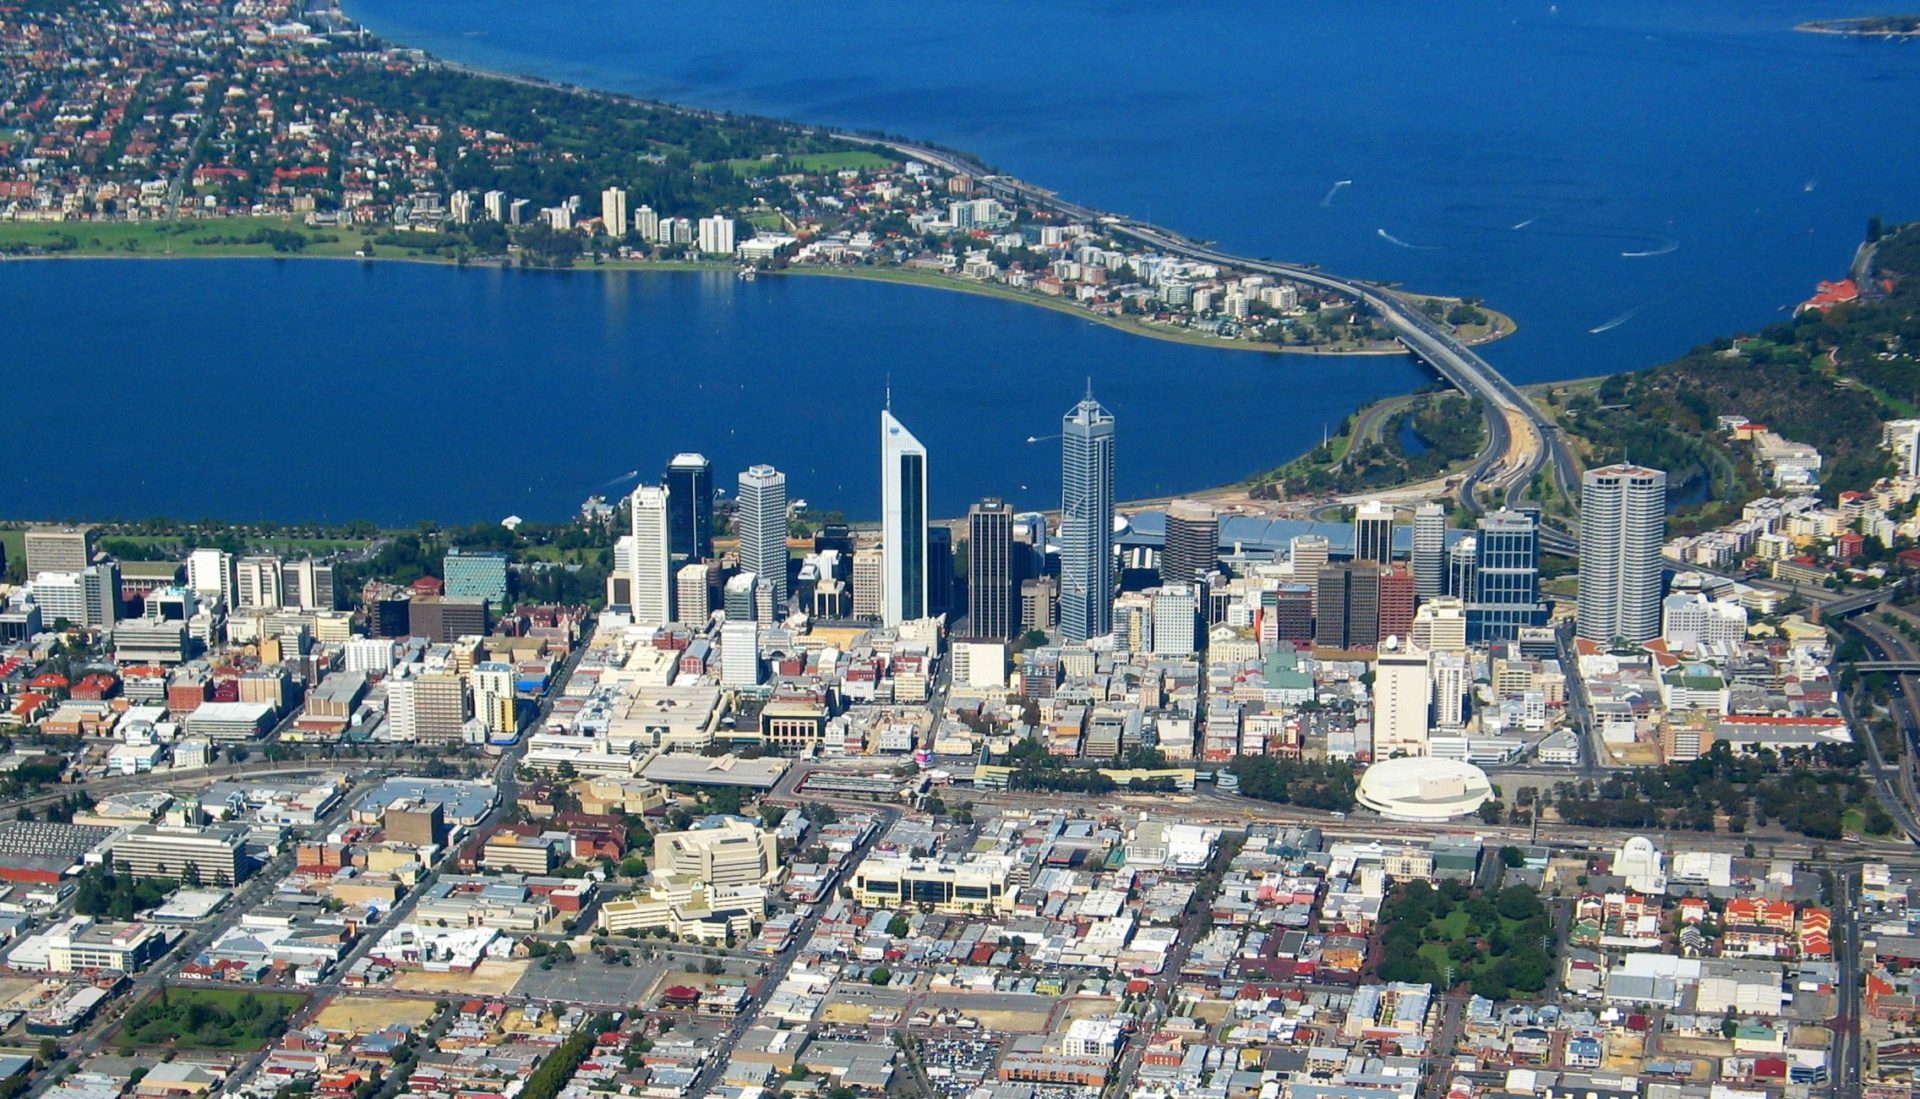 Perth rental and sales activity on the rise